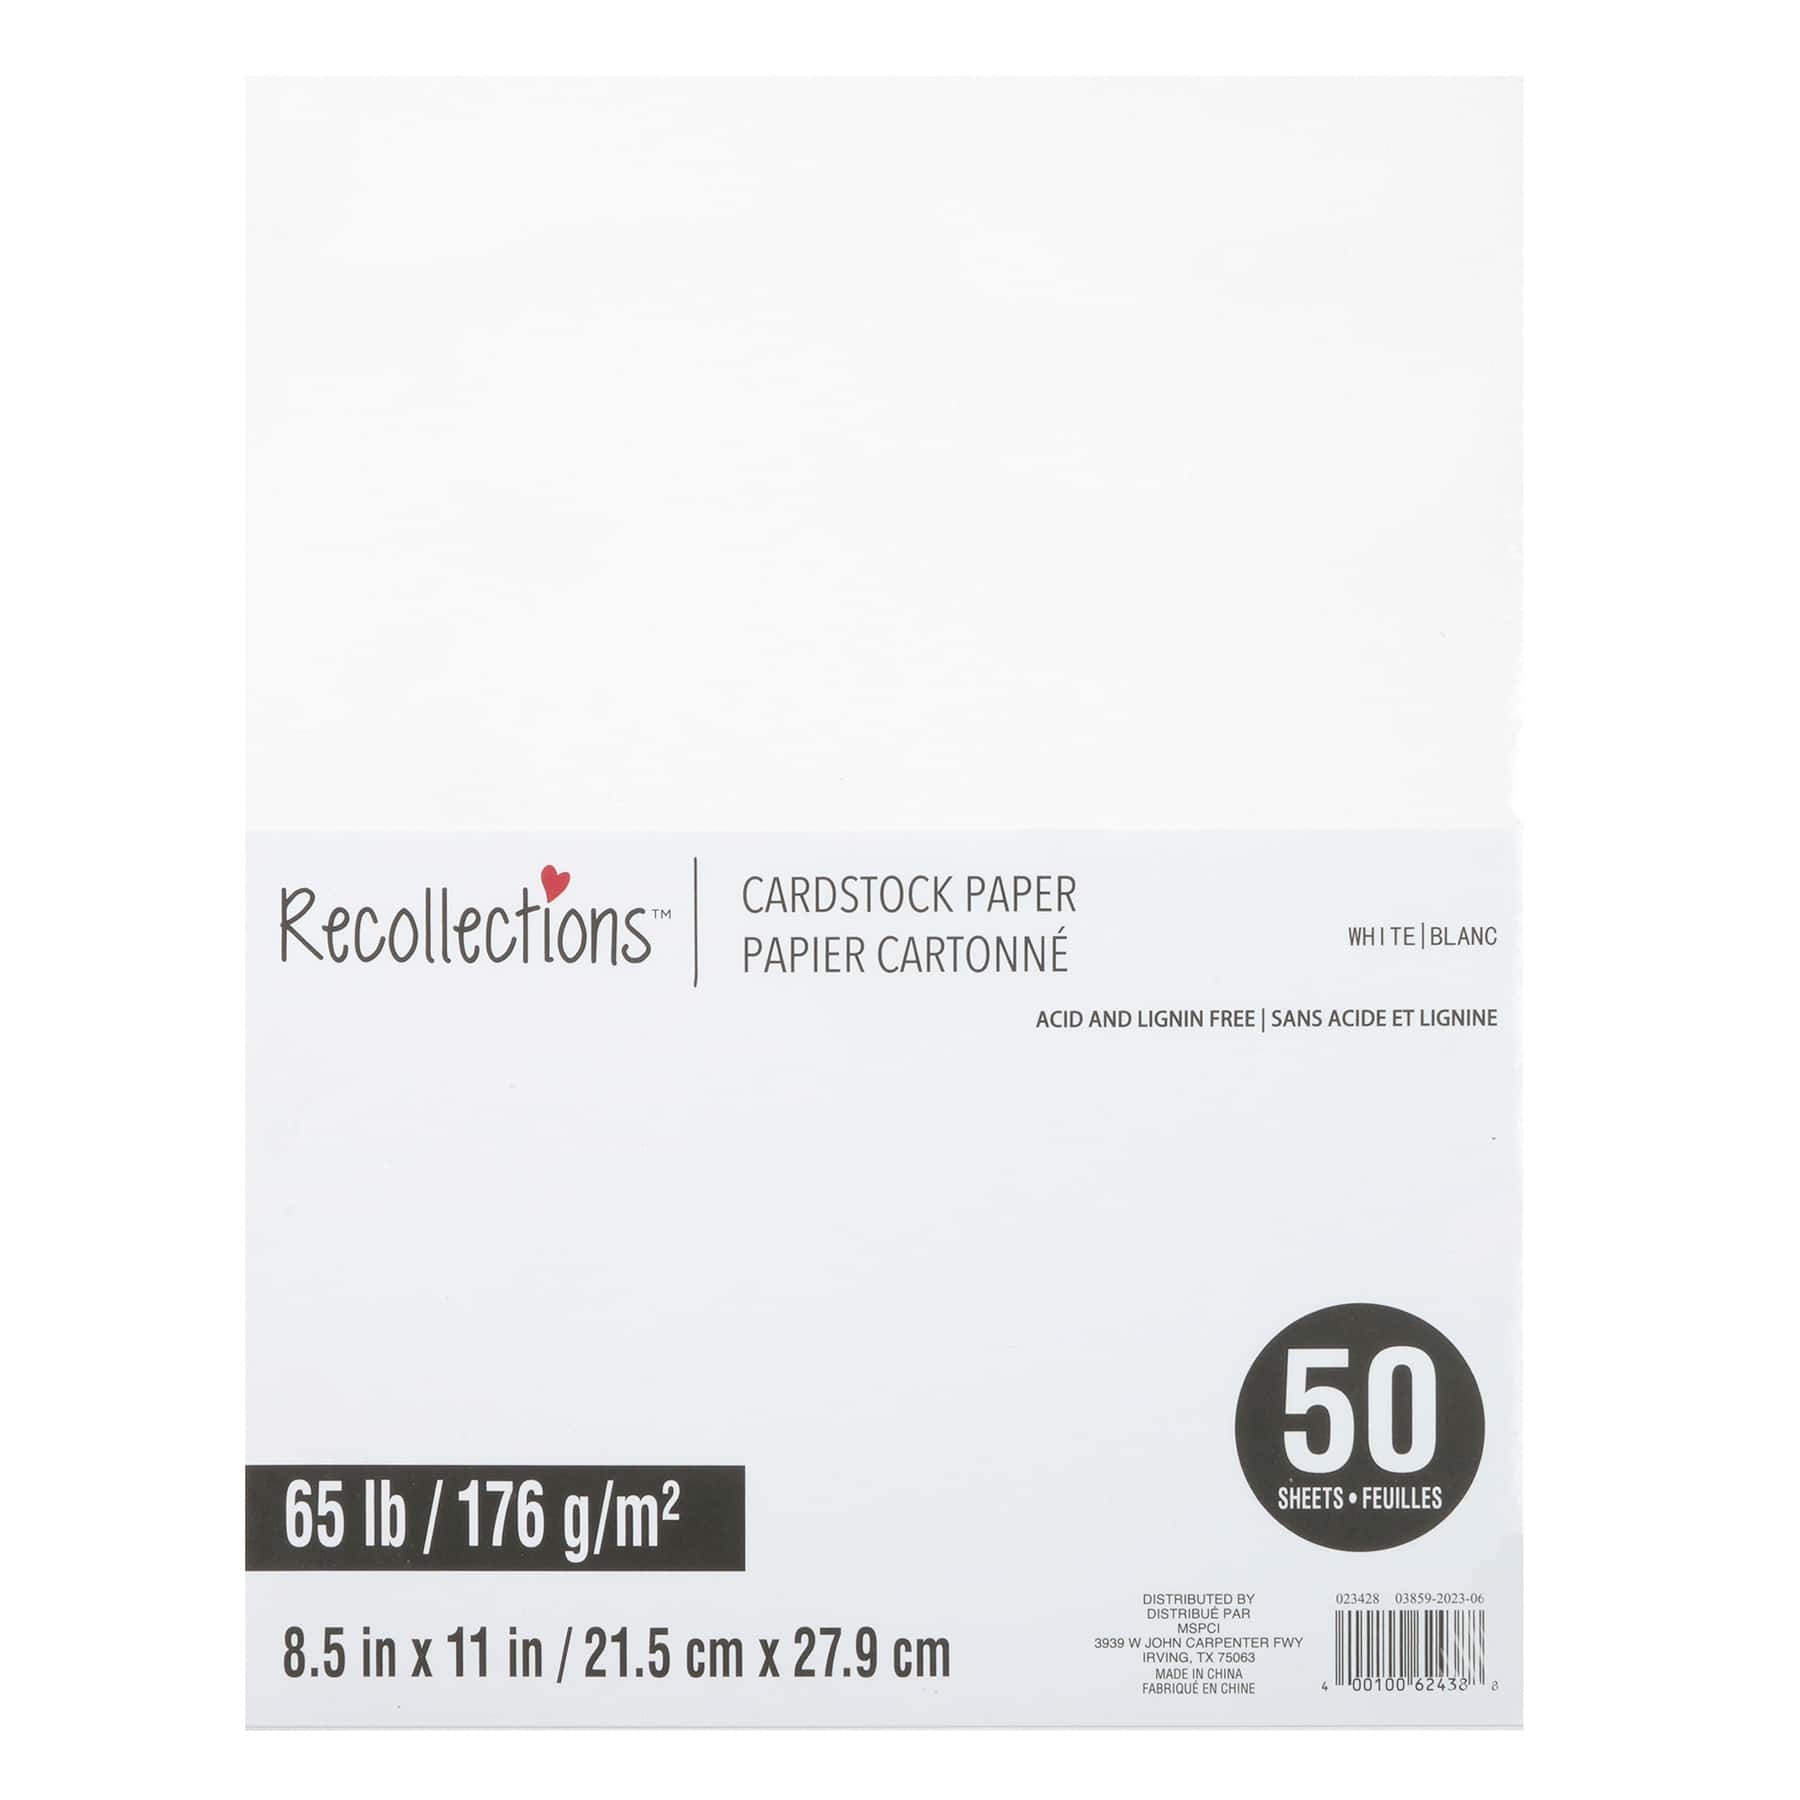 White Card Stock - Size 18 X 12 - 100 Lb Cover - 270 g/m Cover